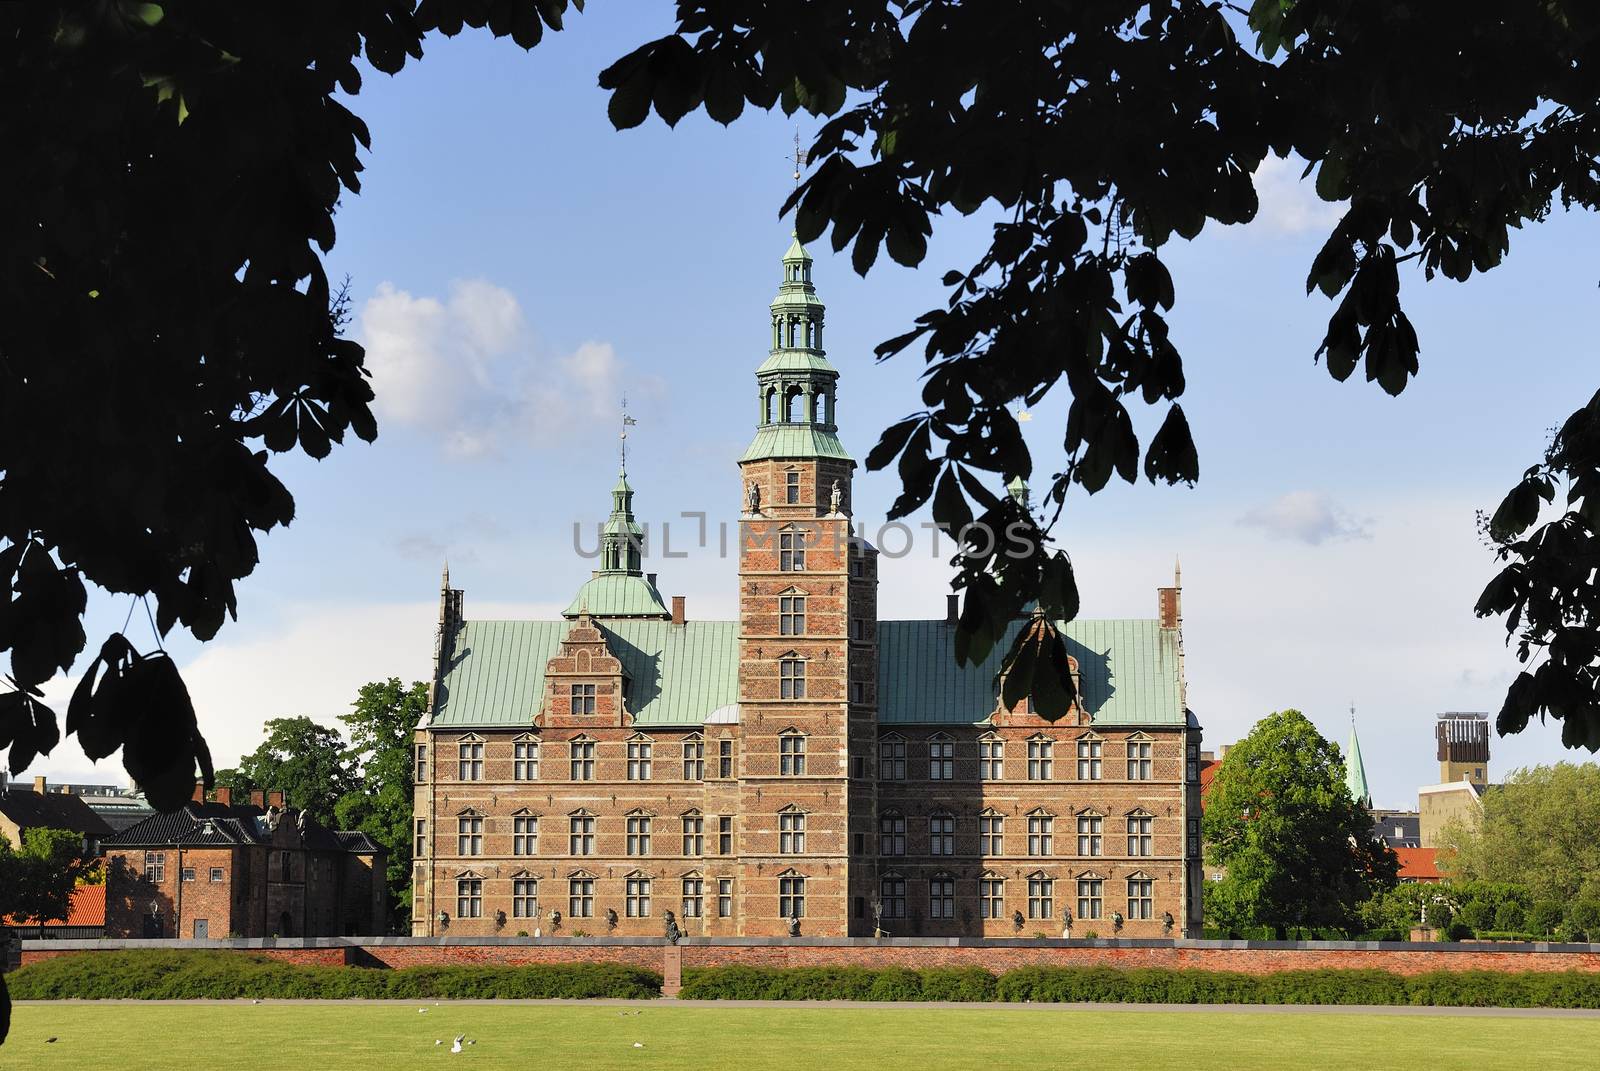 Rosenborg Castle - a small renaissance Castle in the very center of Copenhagen build by King Christian IV as a summer residence outside the town.